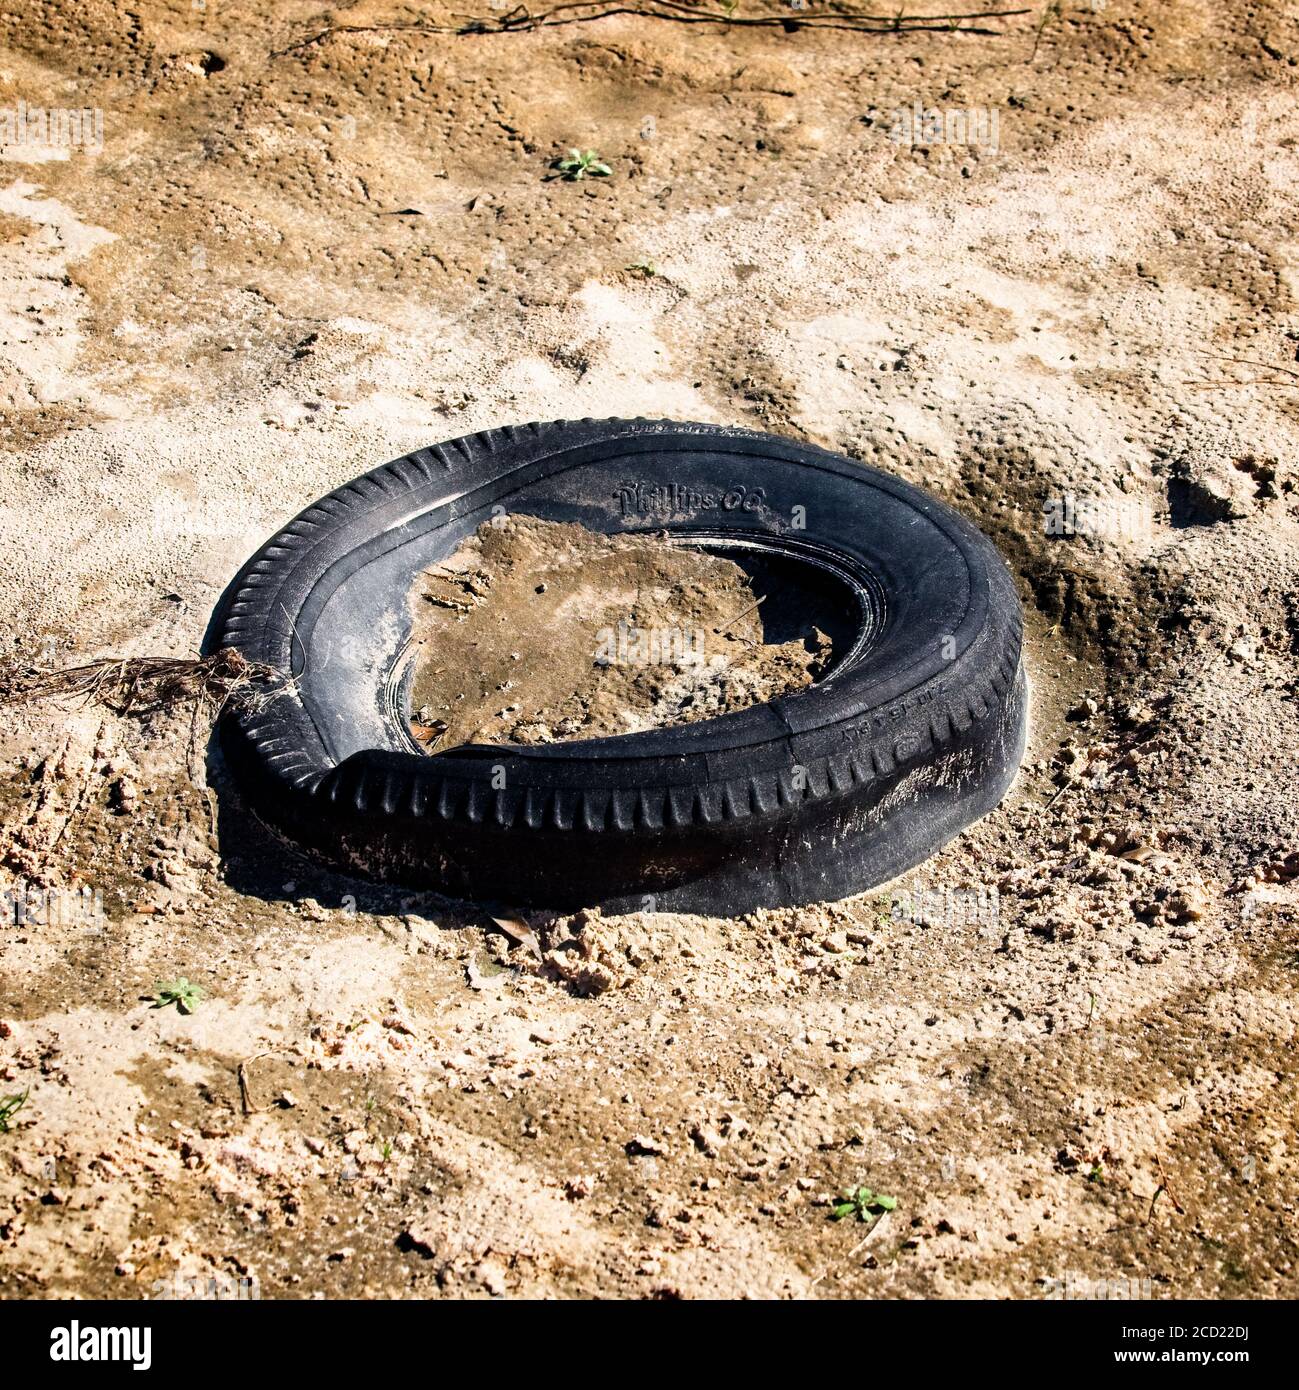 The Woodlands TX USA - 01-20-2020 - Old Tire in River Sandbed Stockfoto